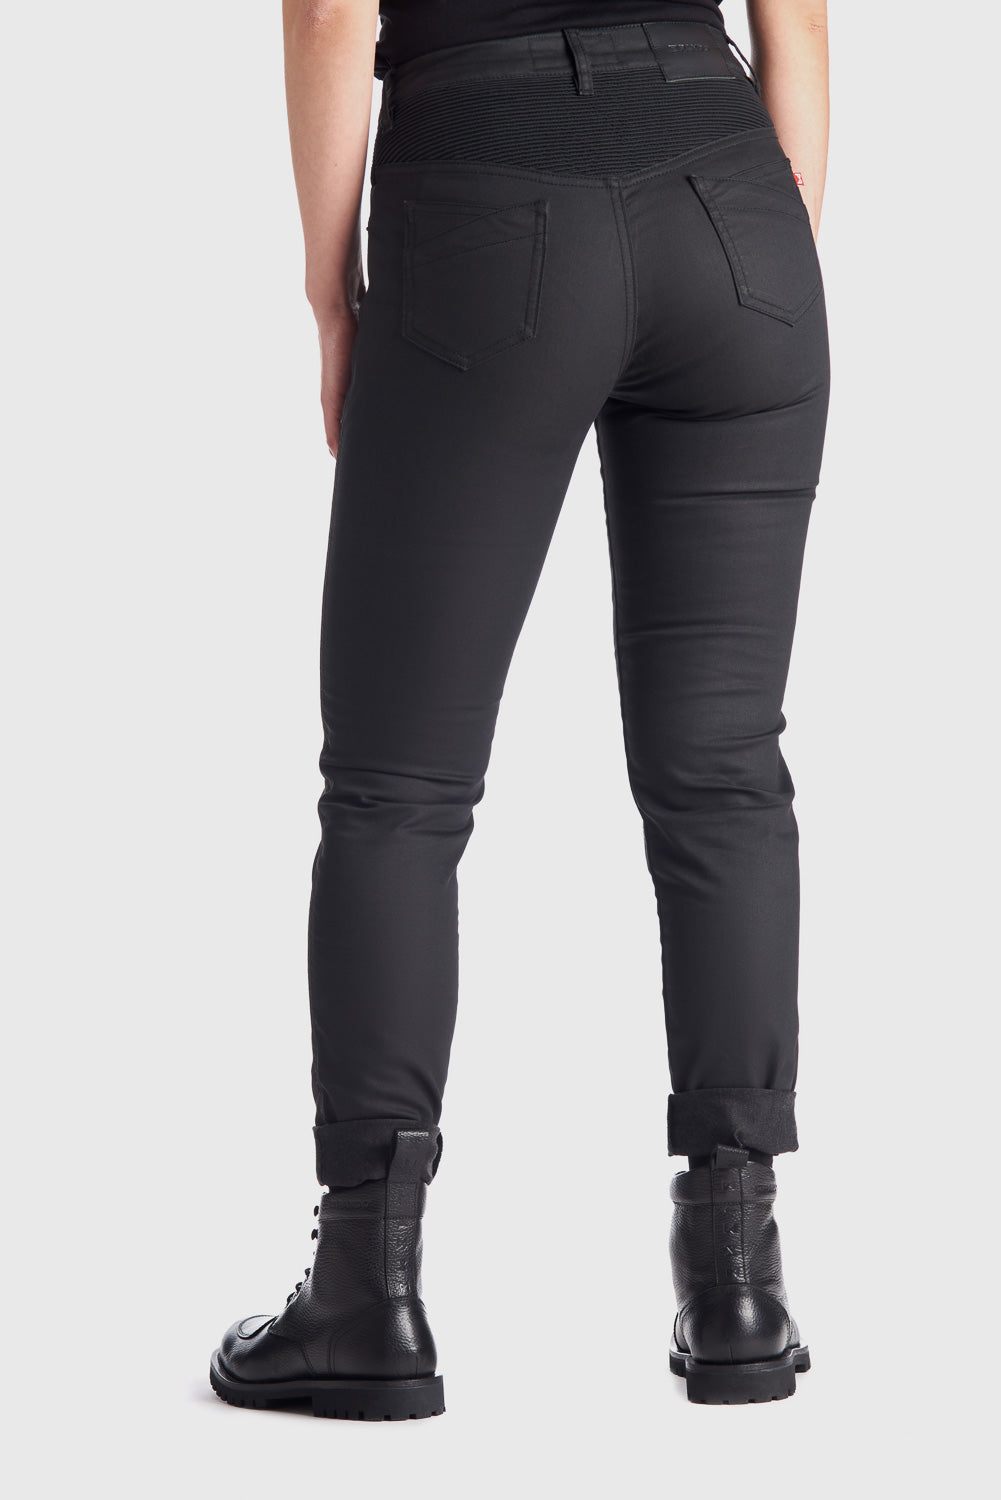 The back of woman&#39;s legs wearing slim-fit motorcycle jeans from Pando Moto 